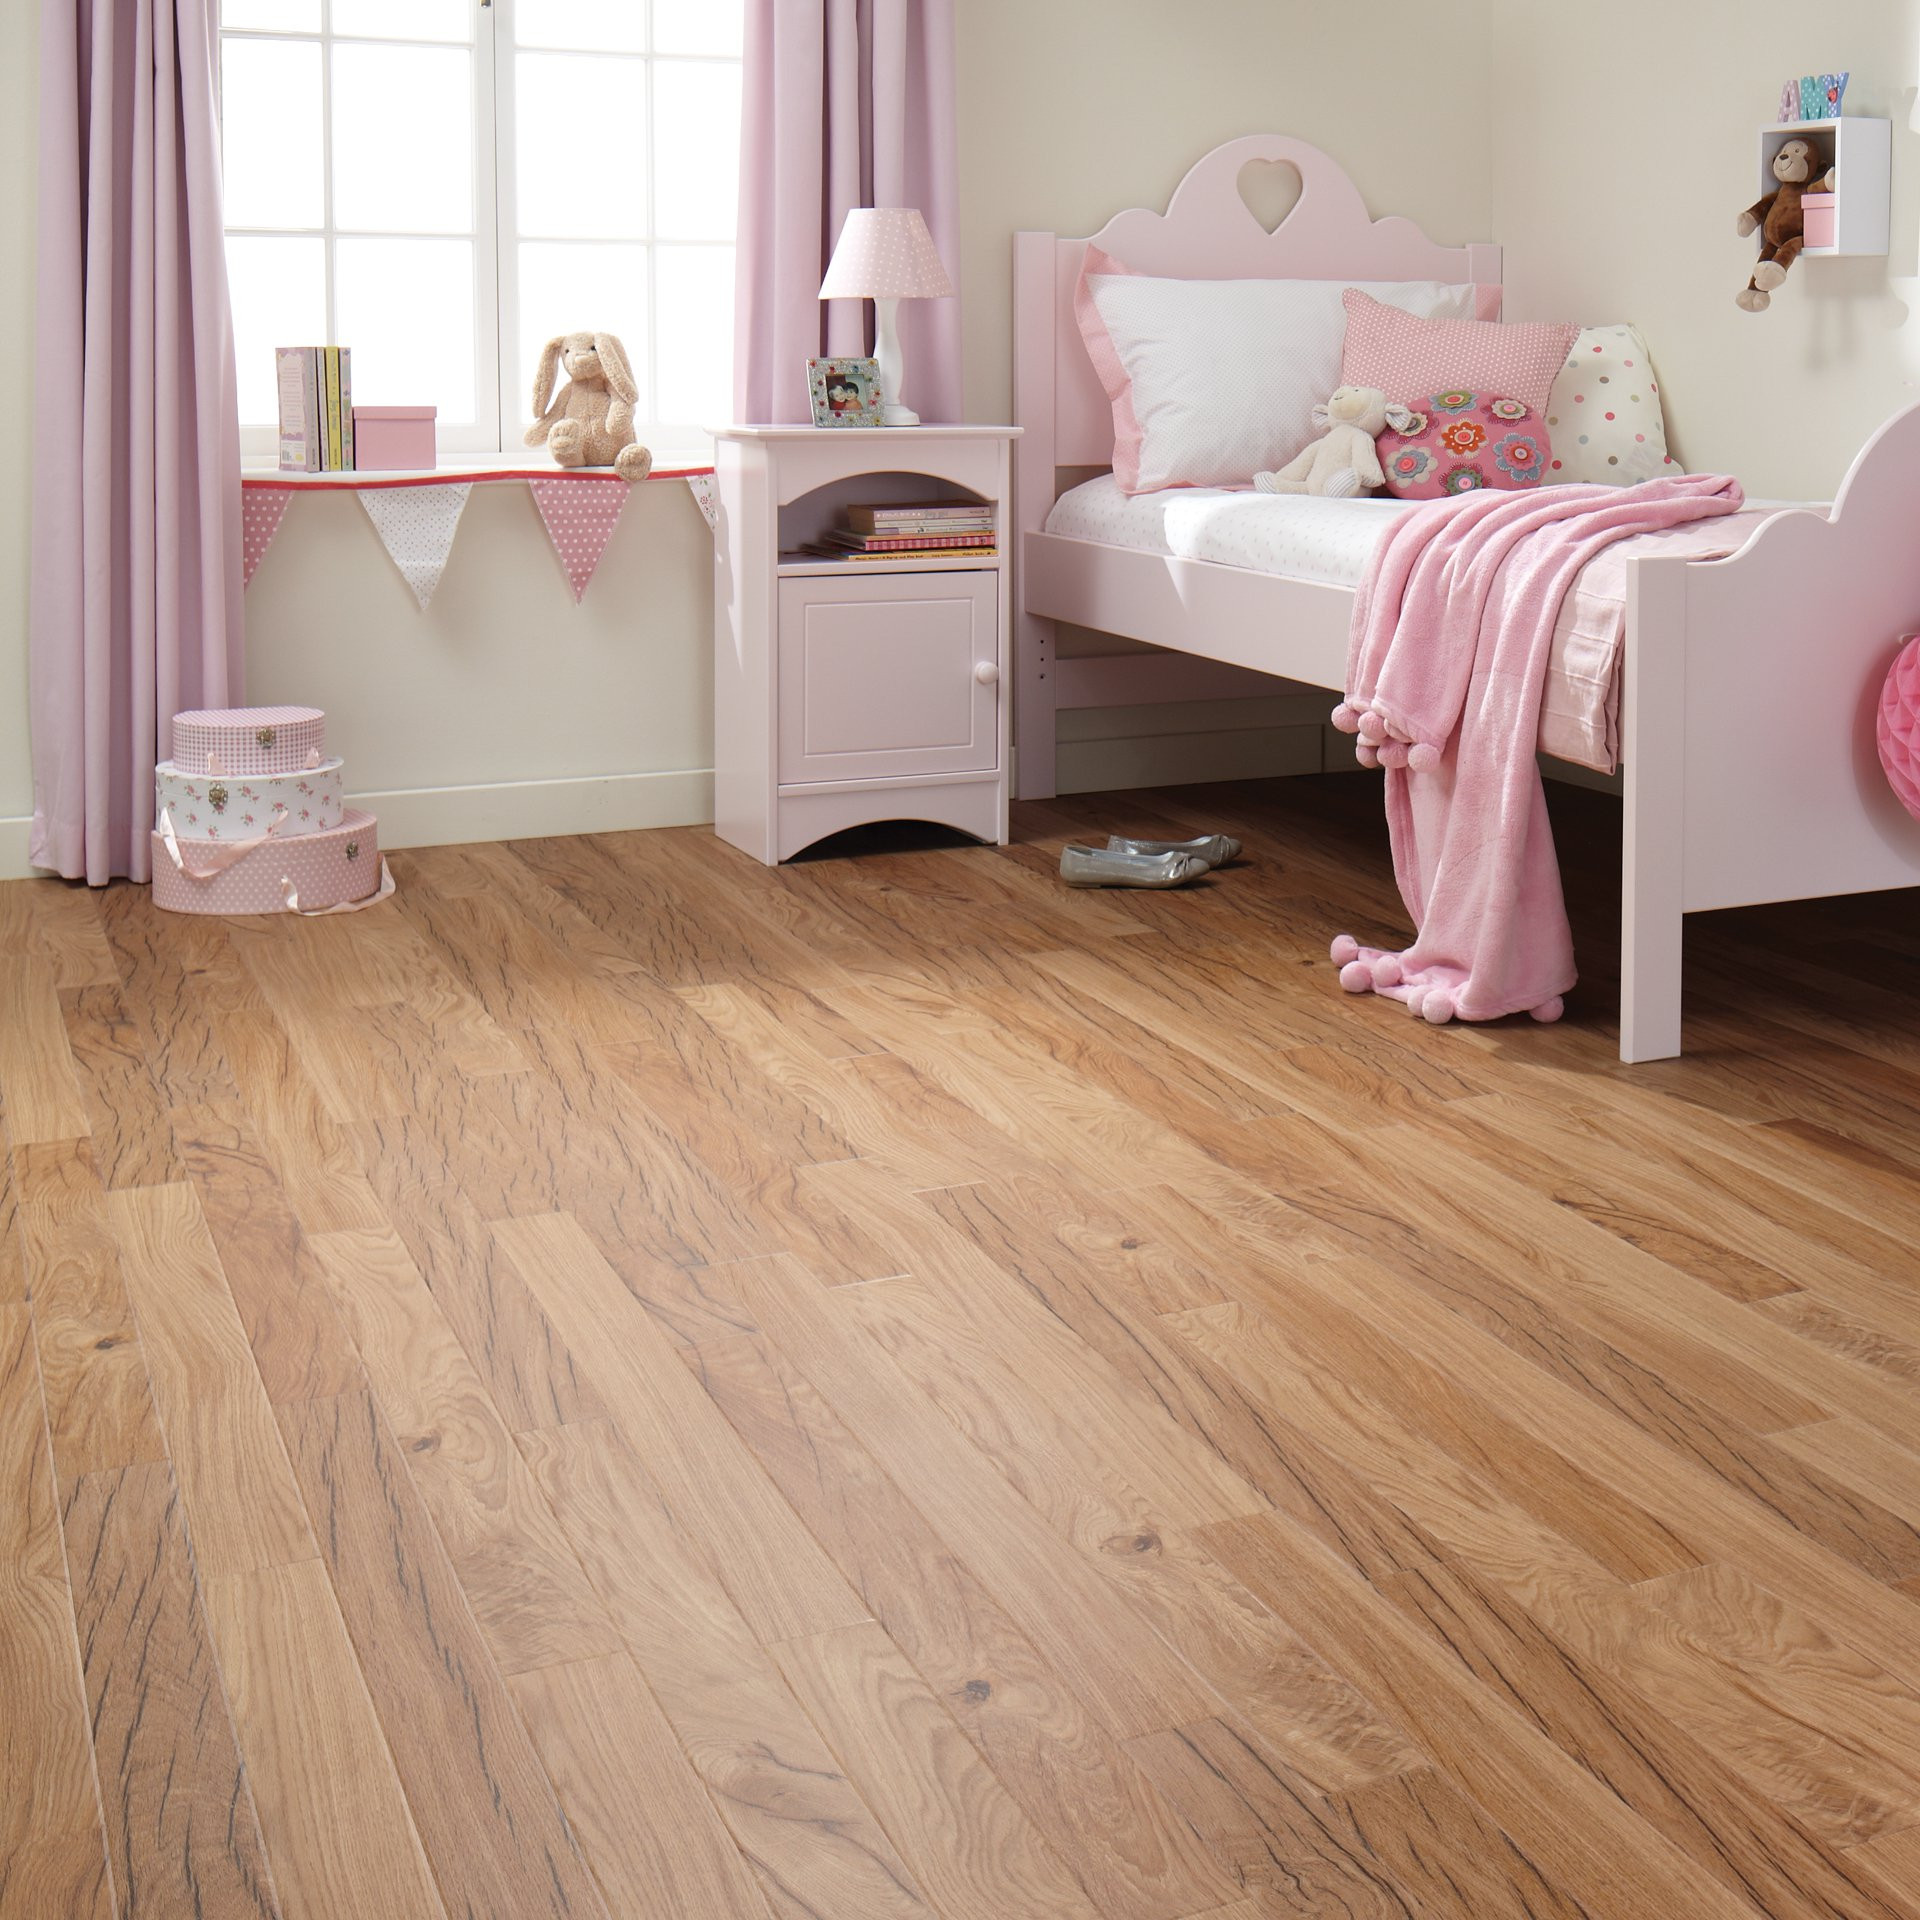 Floor For Kids Room
 Kids Rooms Flooring Ideas for Your Home